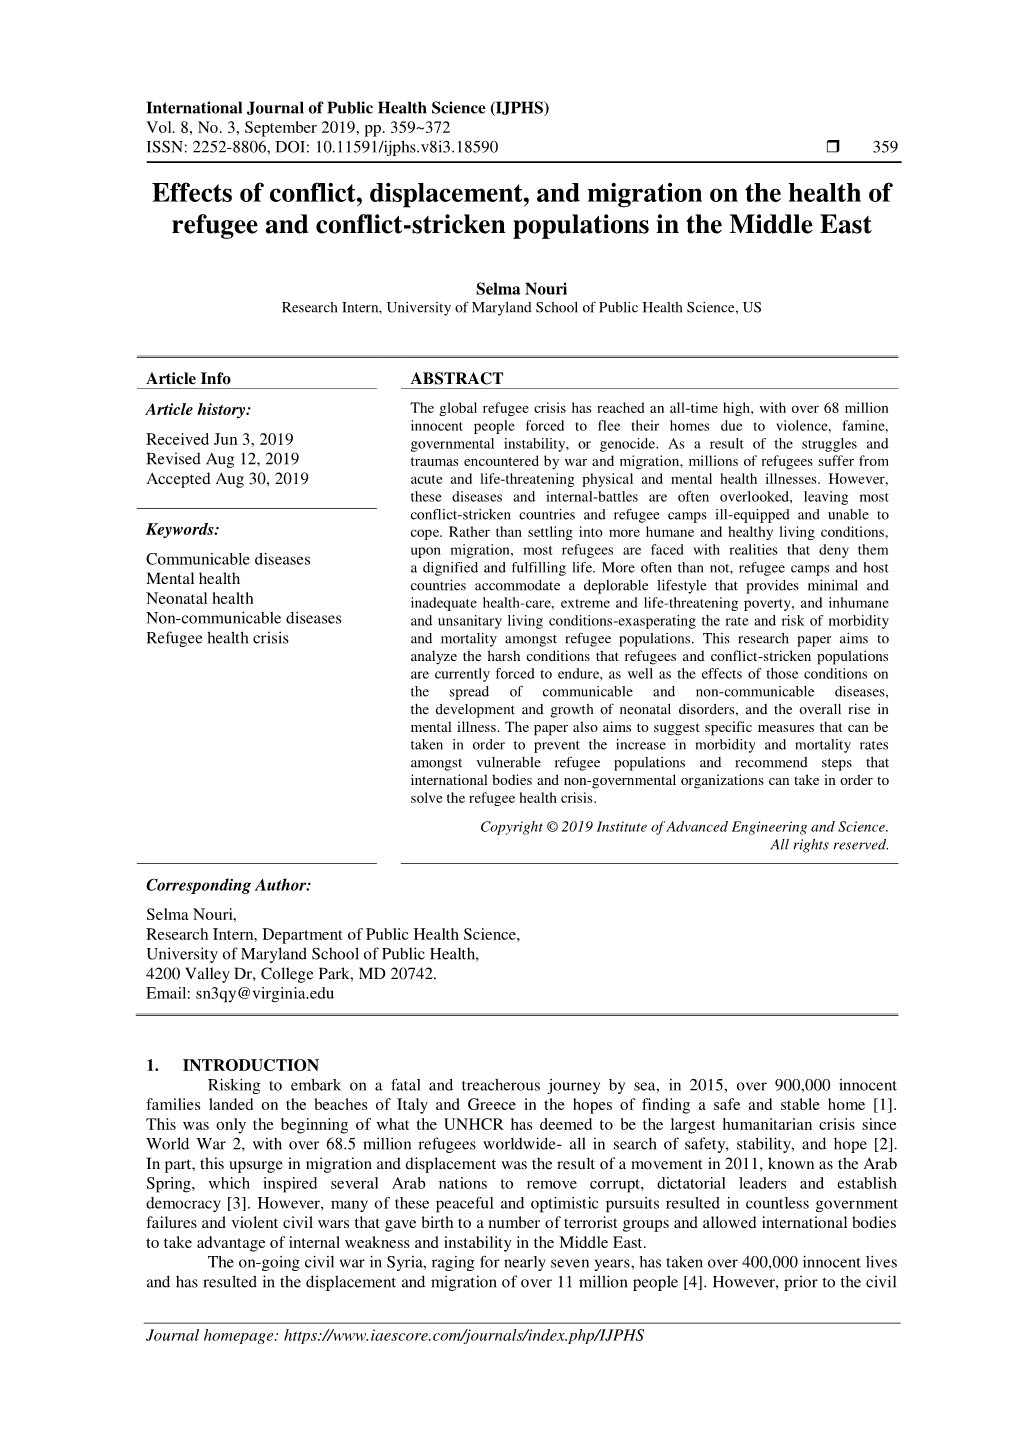 Effects of Conflict, Displacement, and Migration on the Health of Refugee and Conflict-Stricken Populations in the Middle East